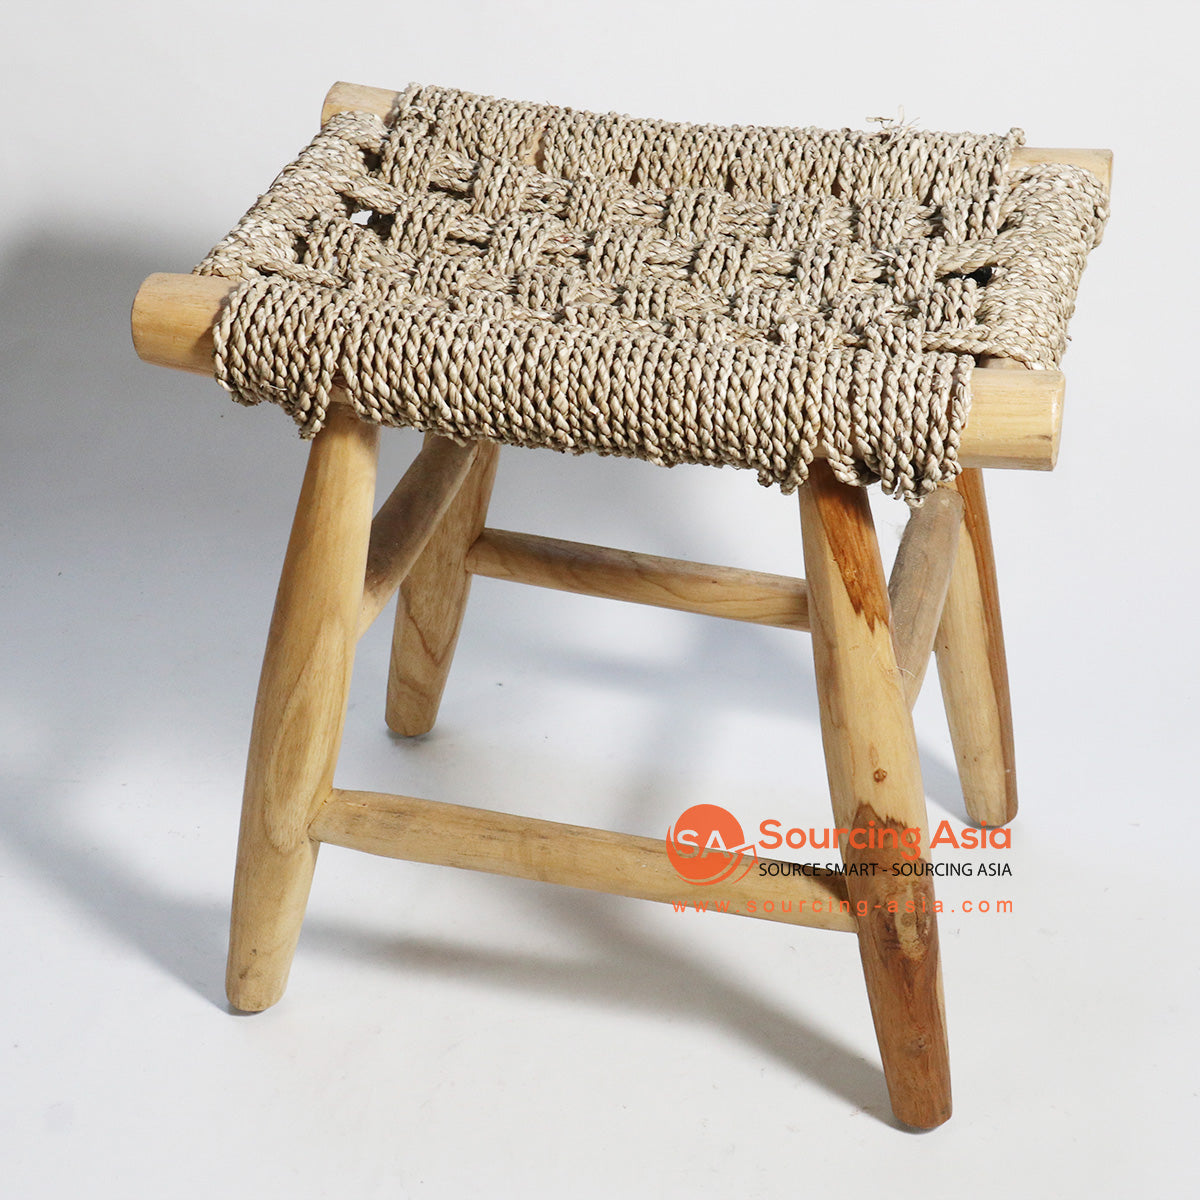 HBSC161 NATURAL SEAGRASS SQUARE STOOL